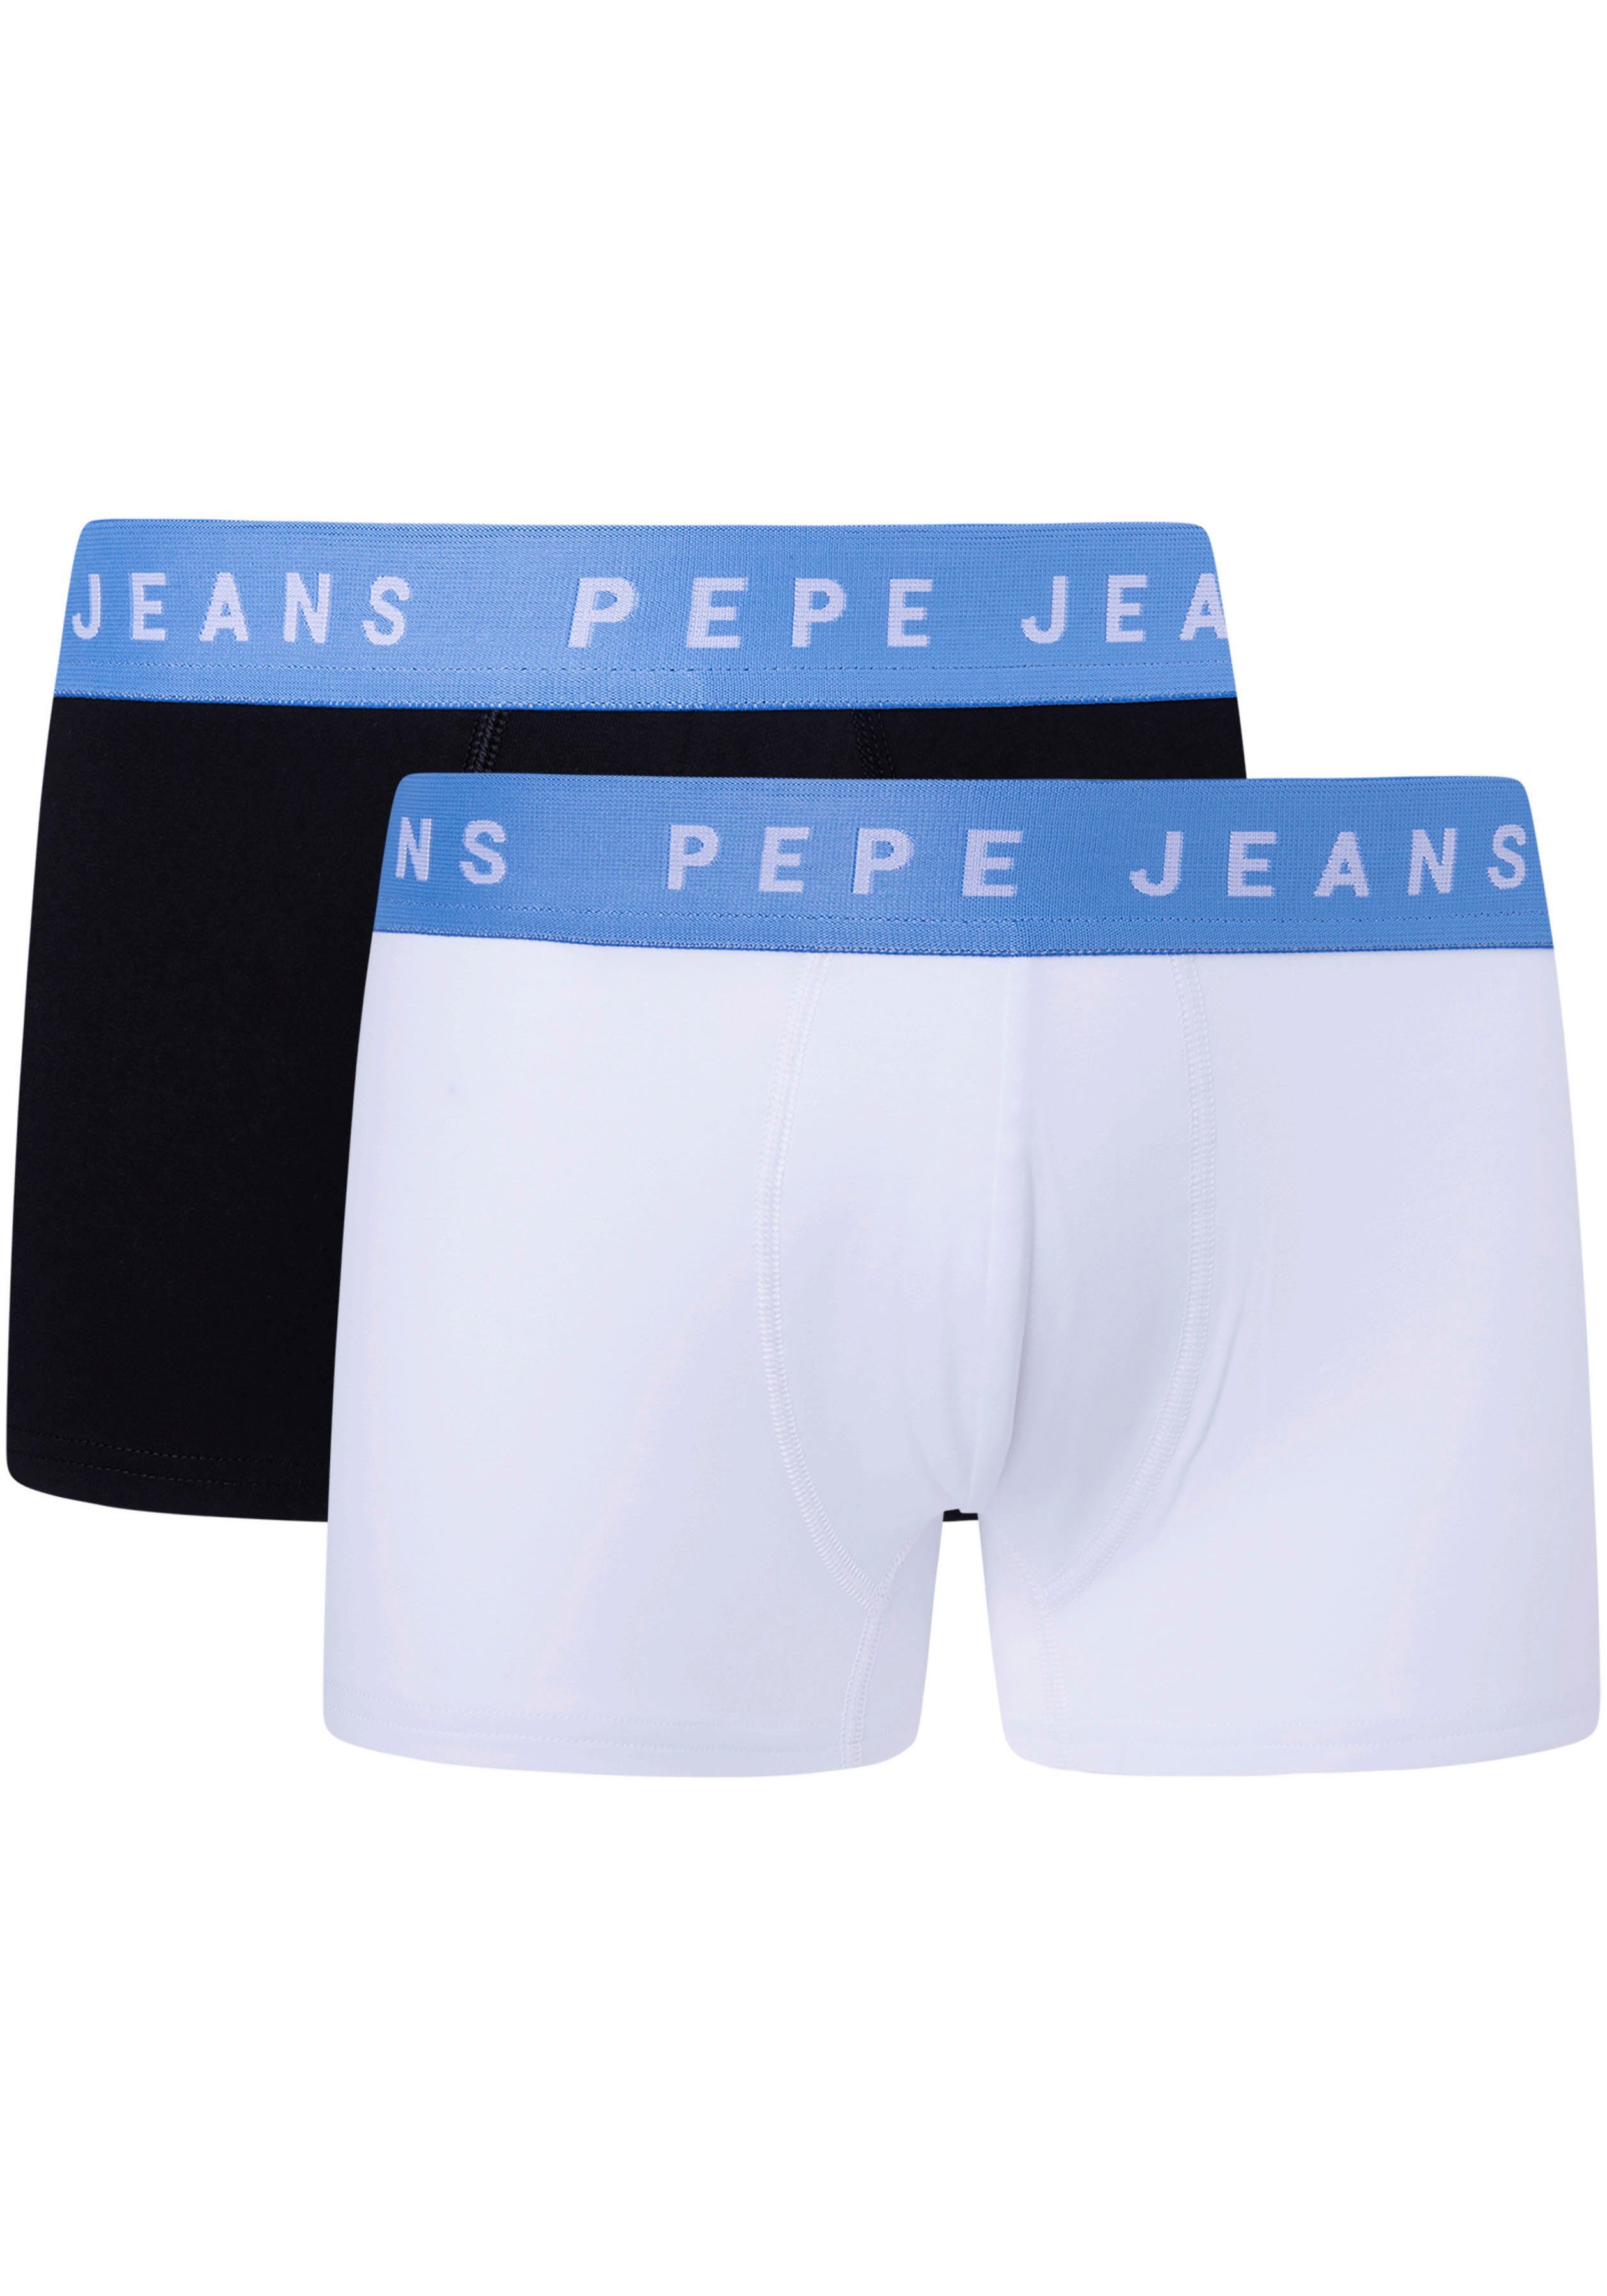 Pepe enganliegend (Packung, Jeans Boxer white 2-St)